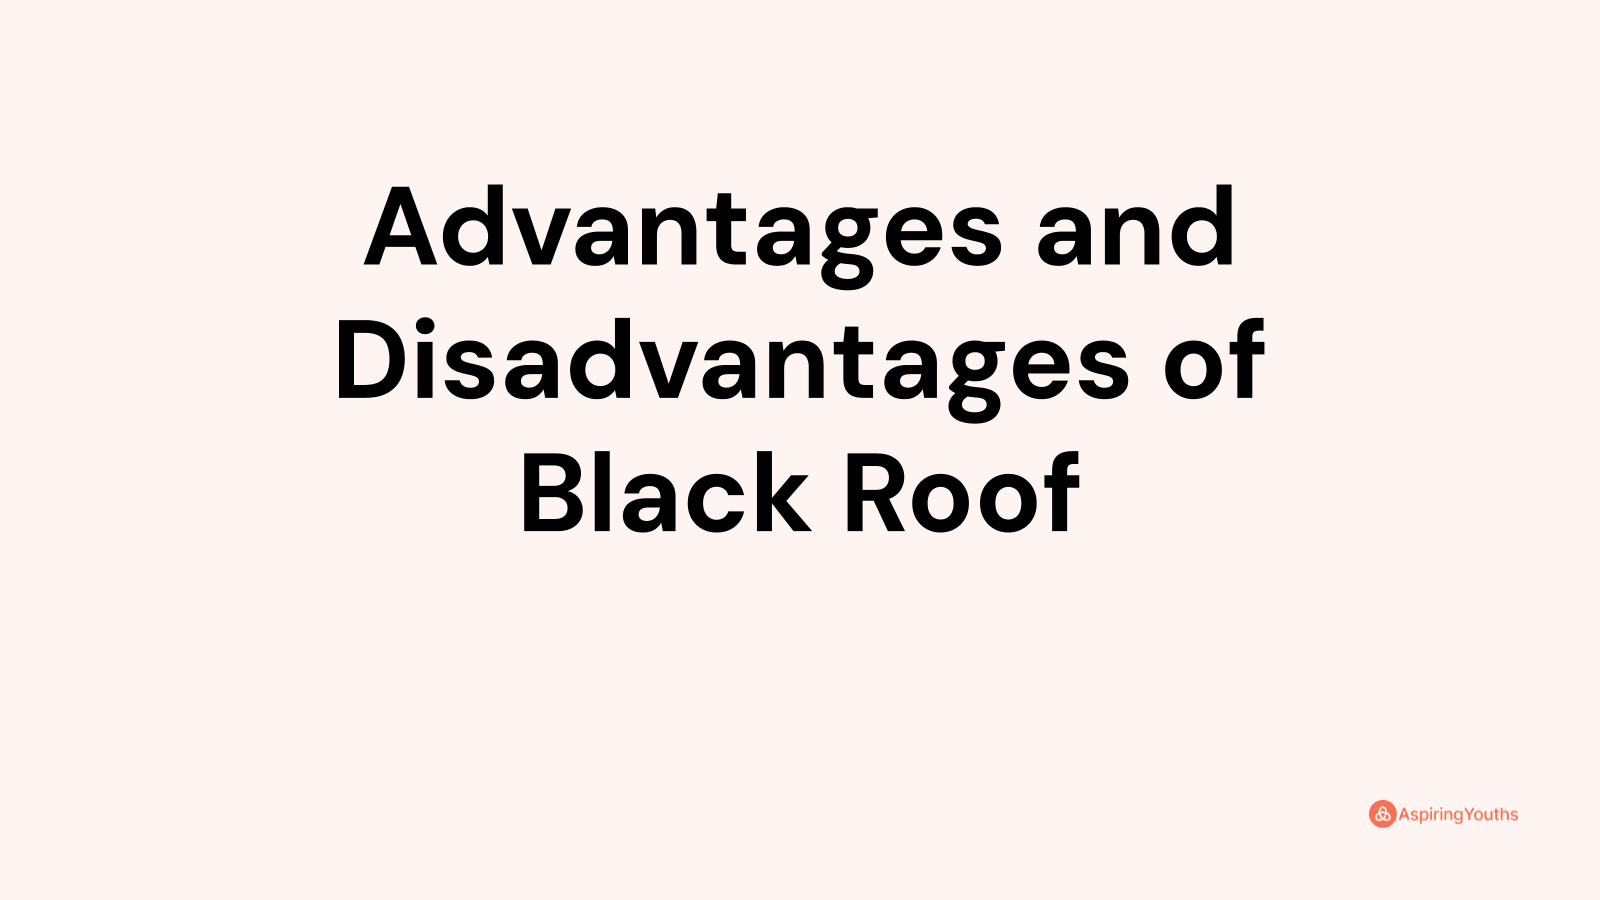 Advantages and disadvantages of Black Roof